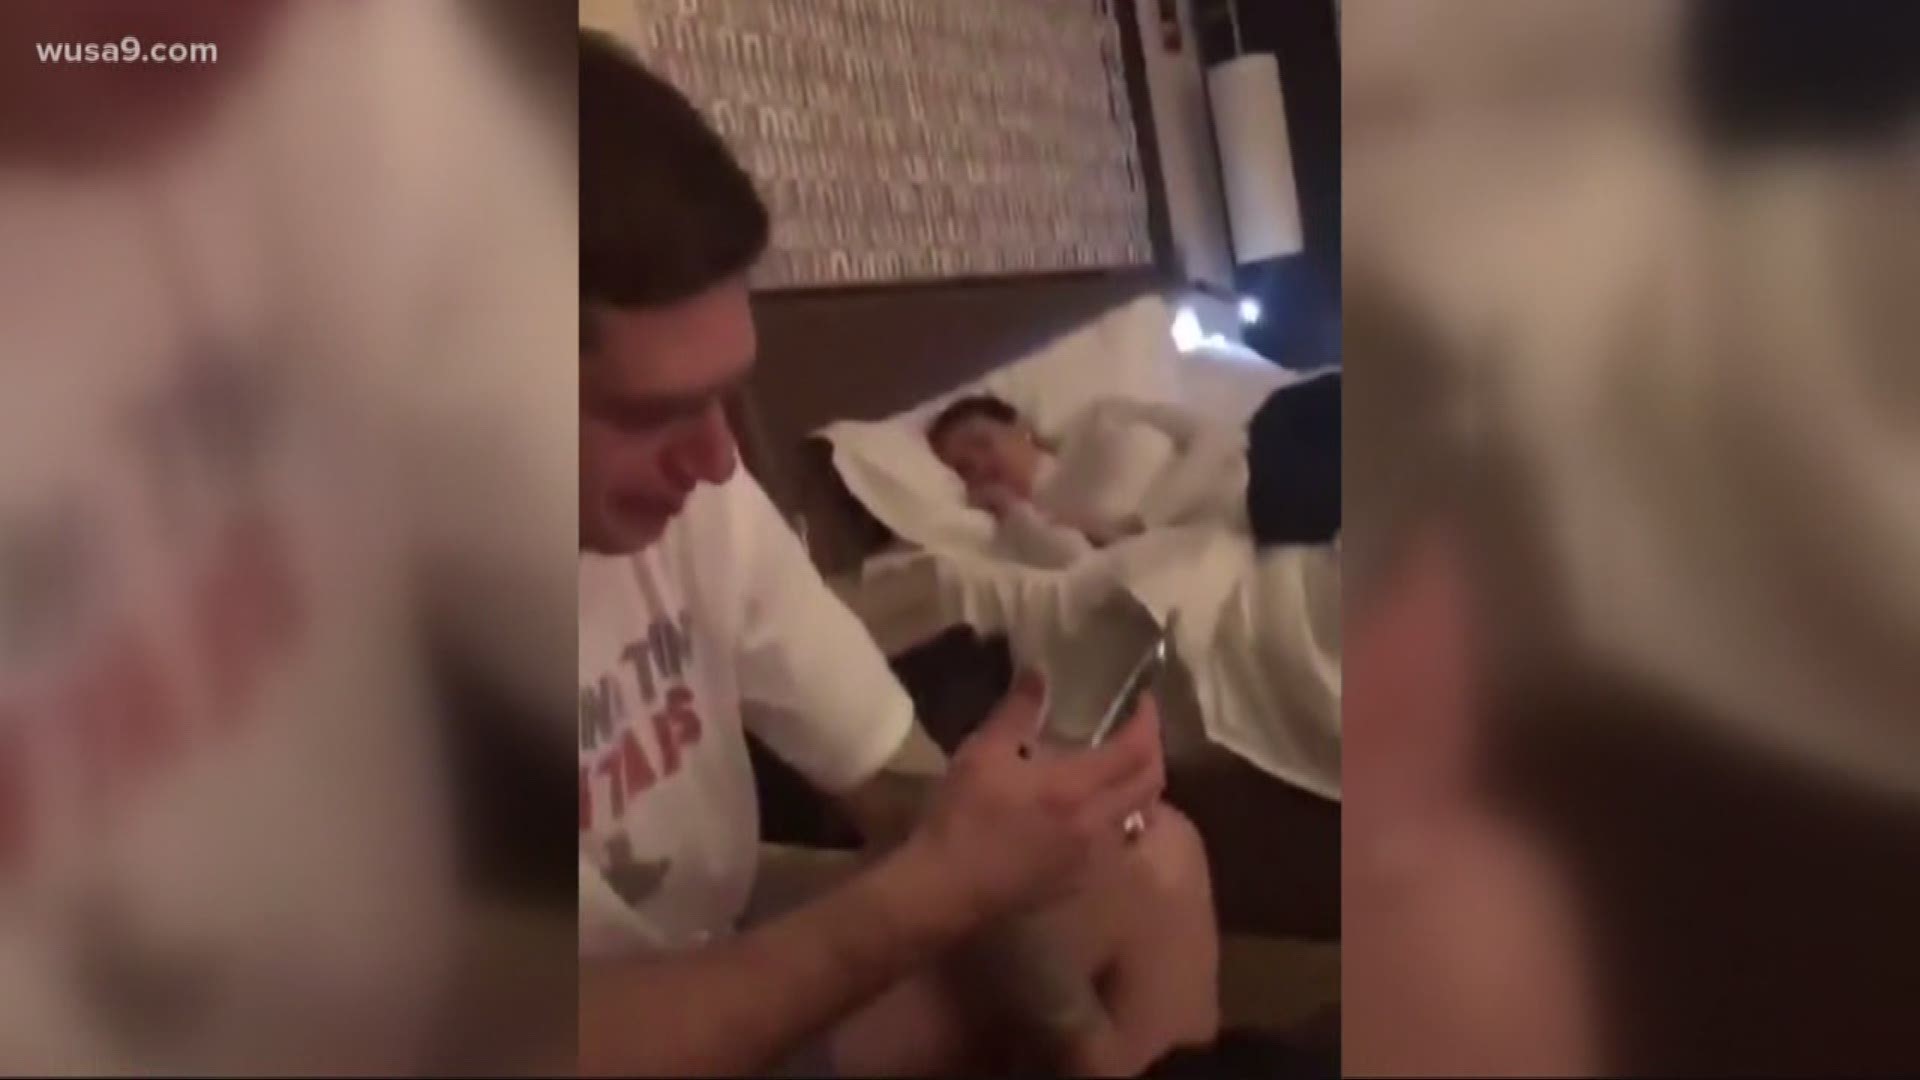 Video surfaced on social media showing Capitals forward Evgeny Kuznetsov sitting near two lines of a white powdery substance.